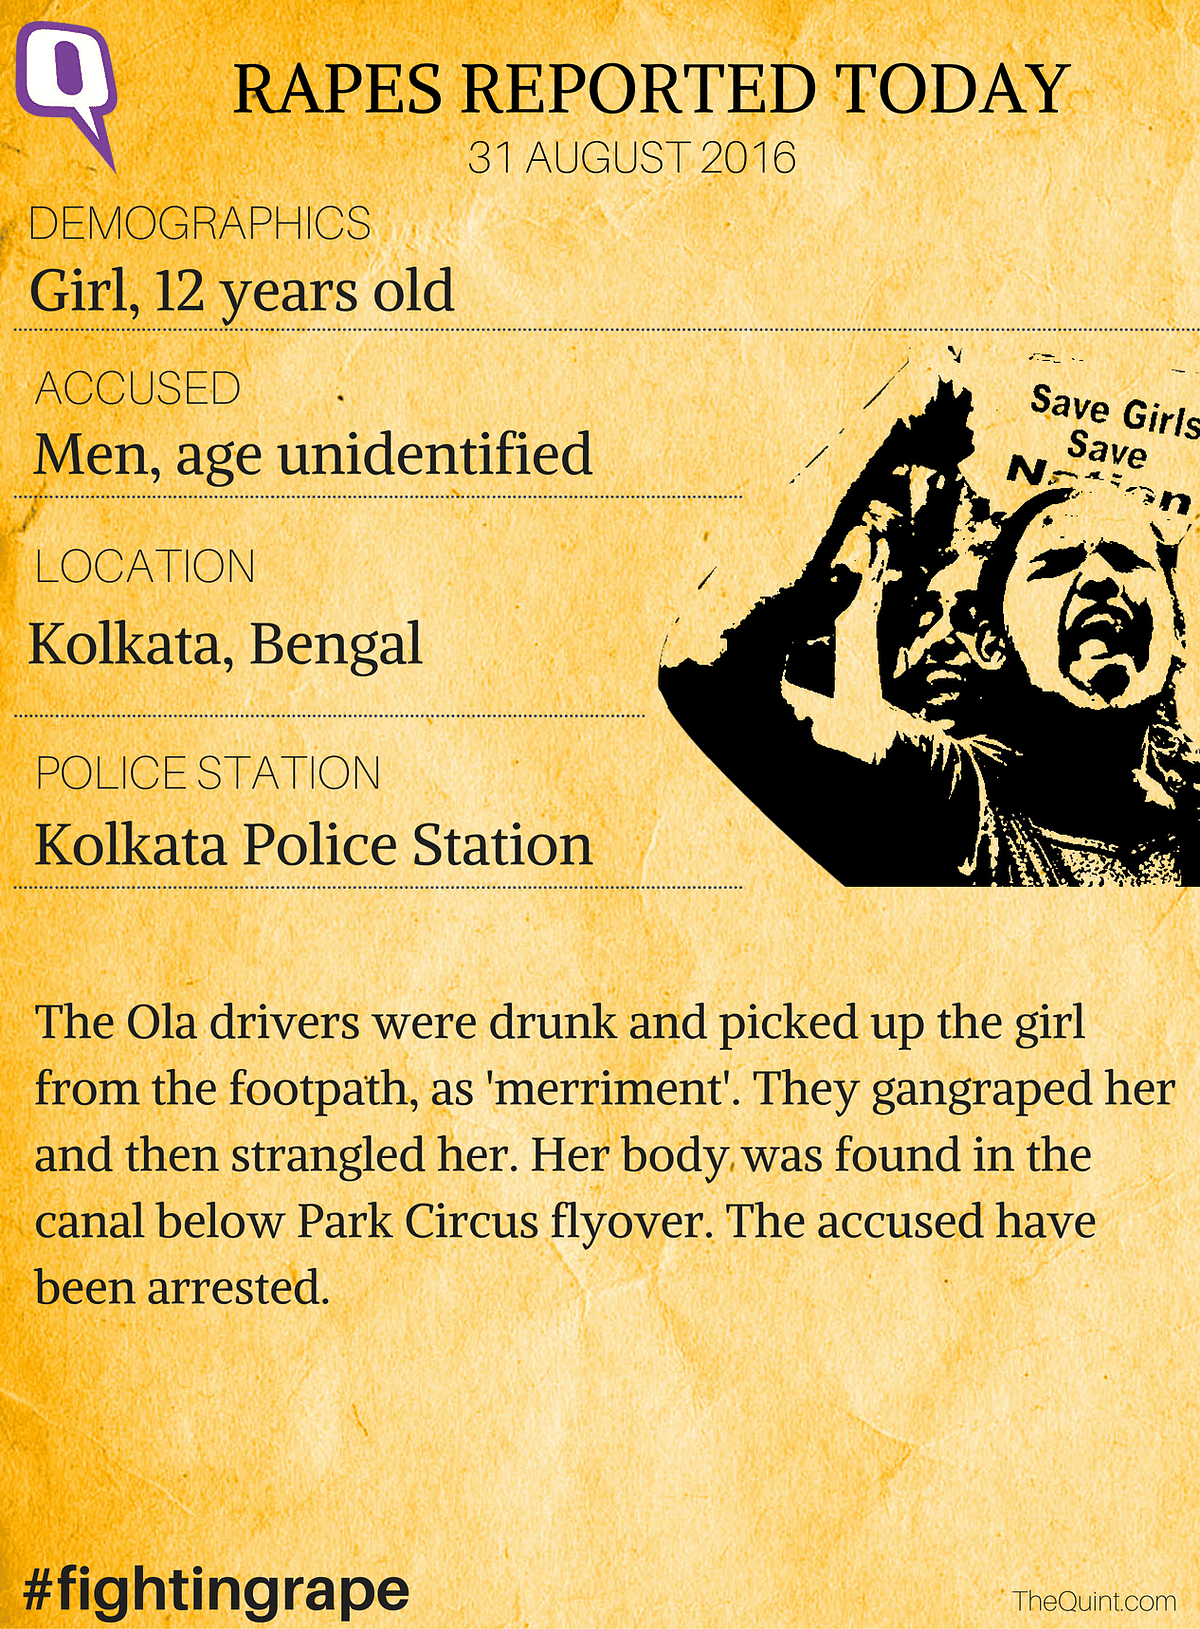 As Independent India turns 70, The Quint’s year-long-campaign will attempt to track rapes reported every day. 